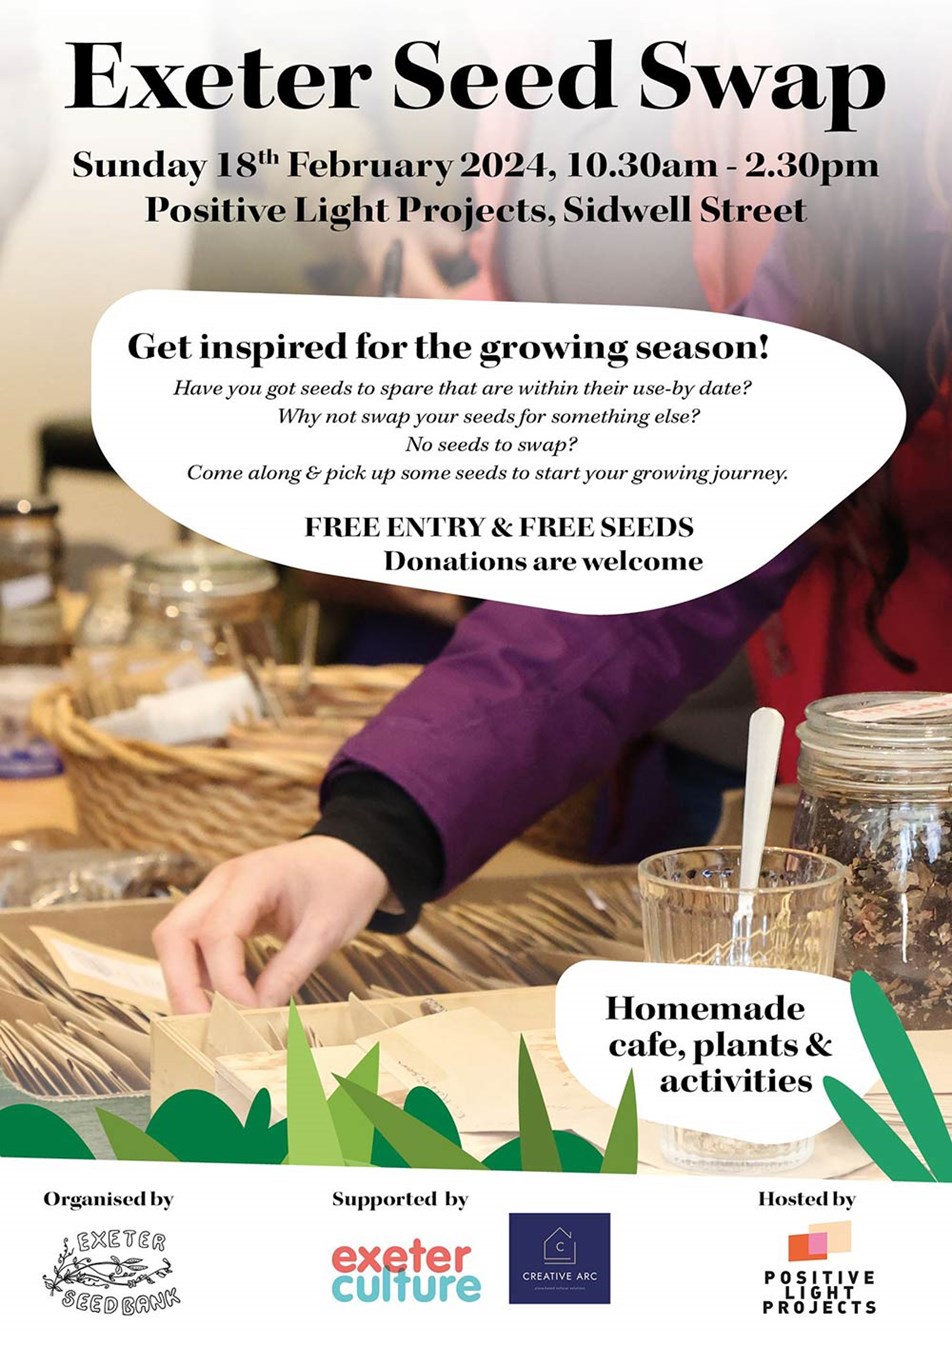 Seed Swap Poster